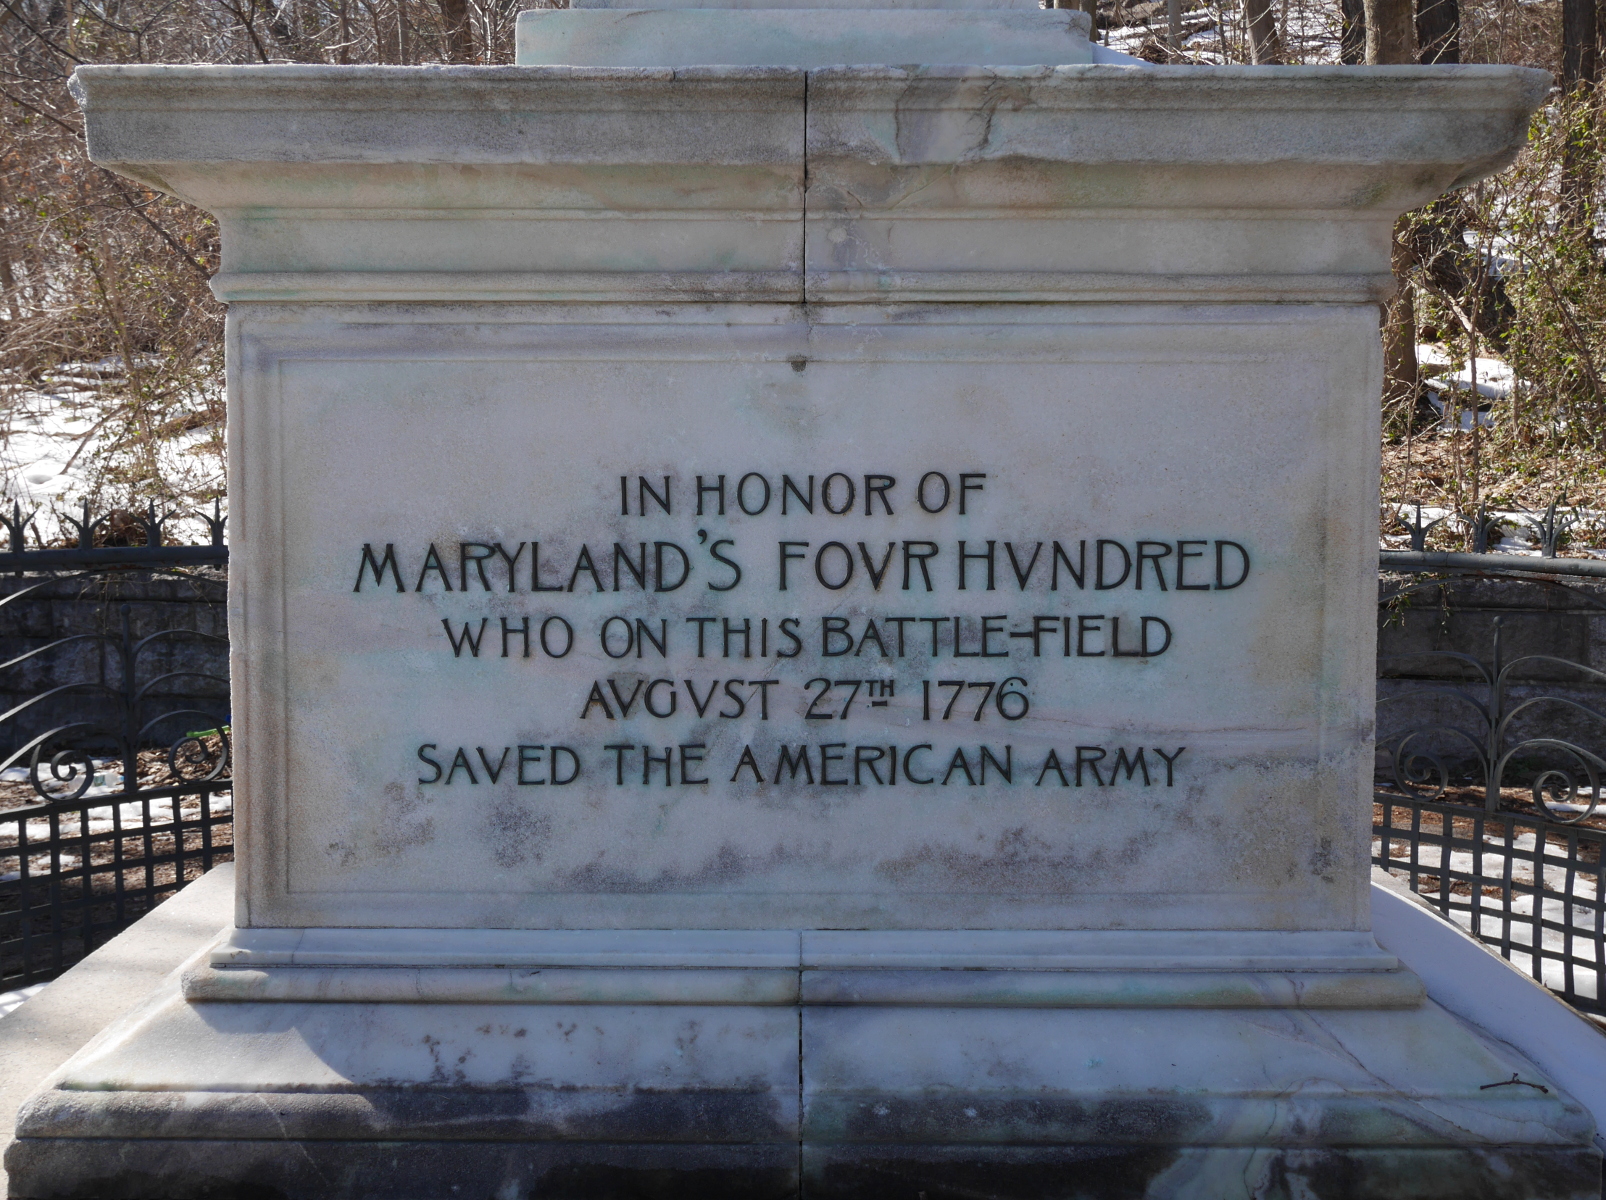 Misleading inscription on the memorial to "Maryland's Four Hundred."